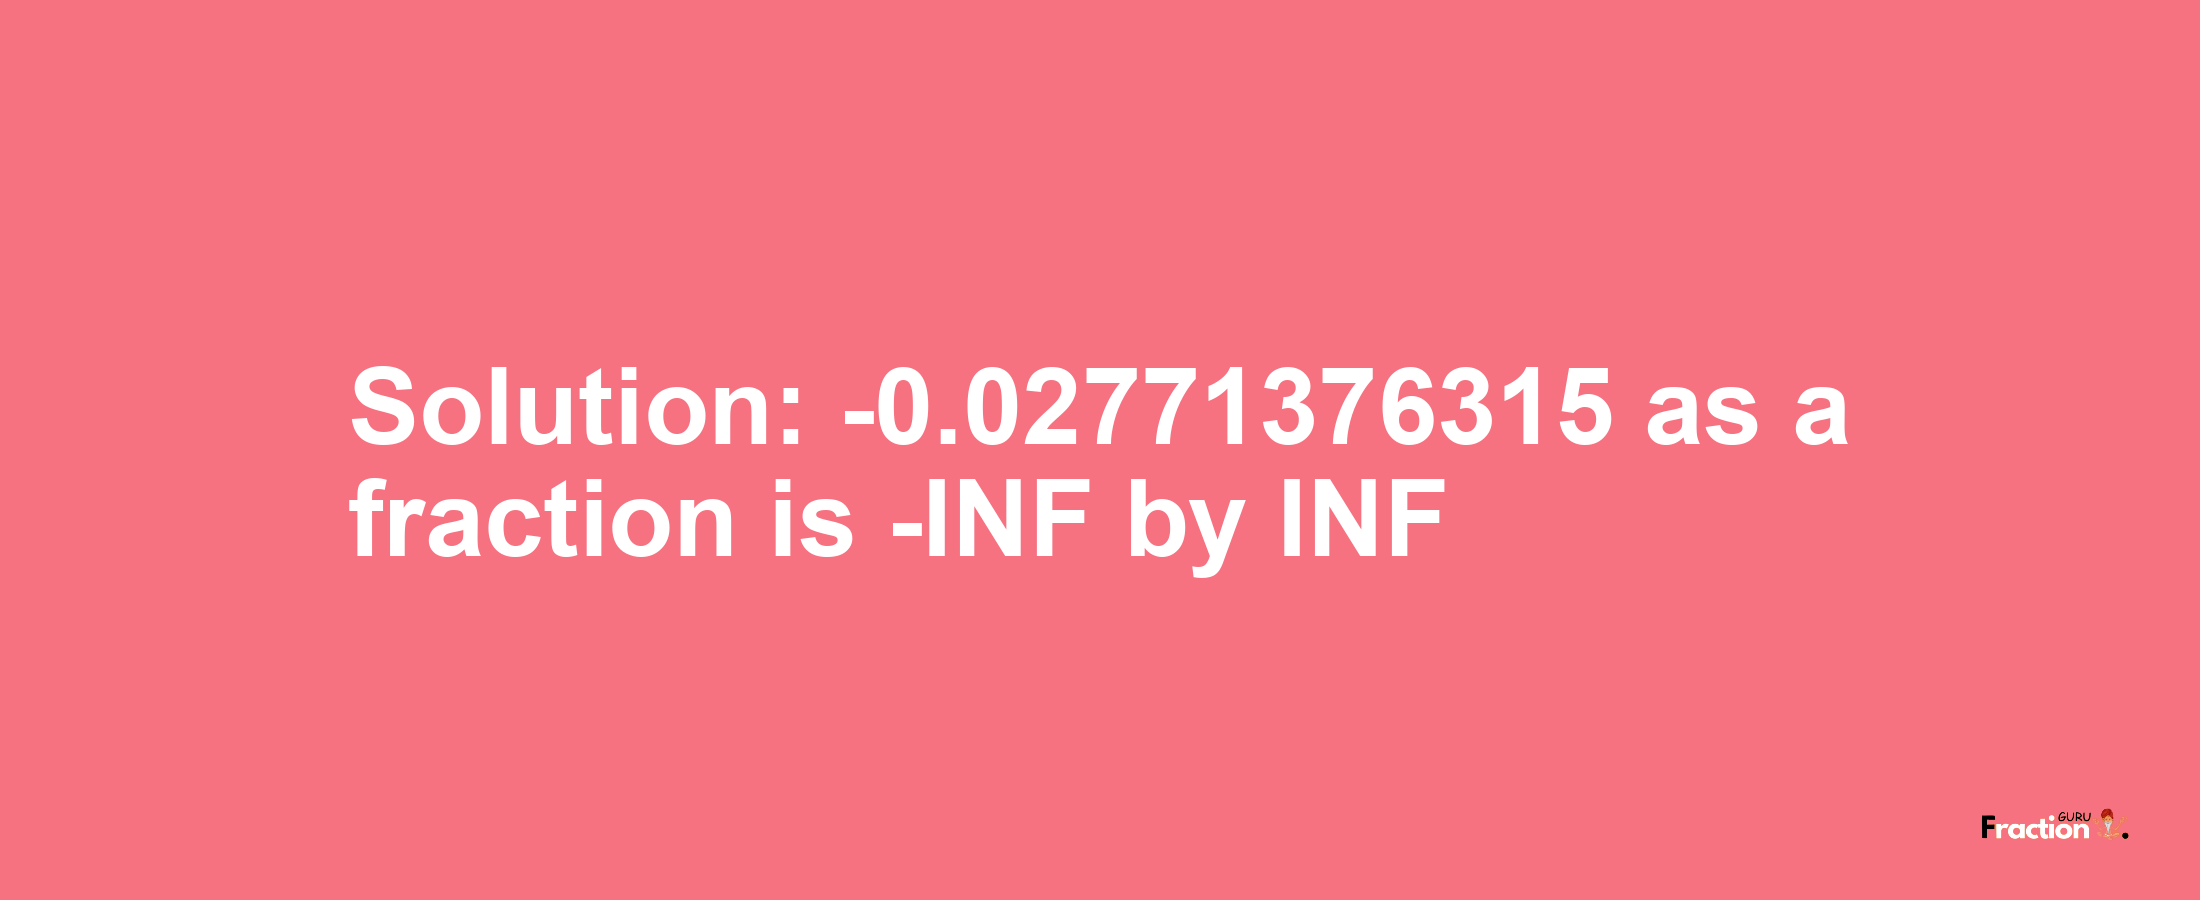 Solution:-0.02771376315 as a fraction is -INF/INF